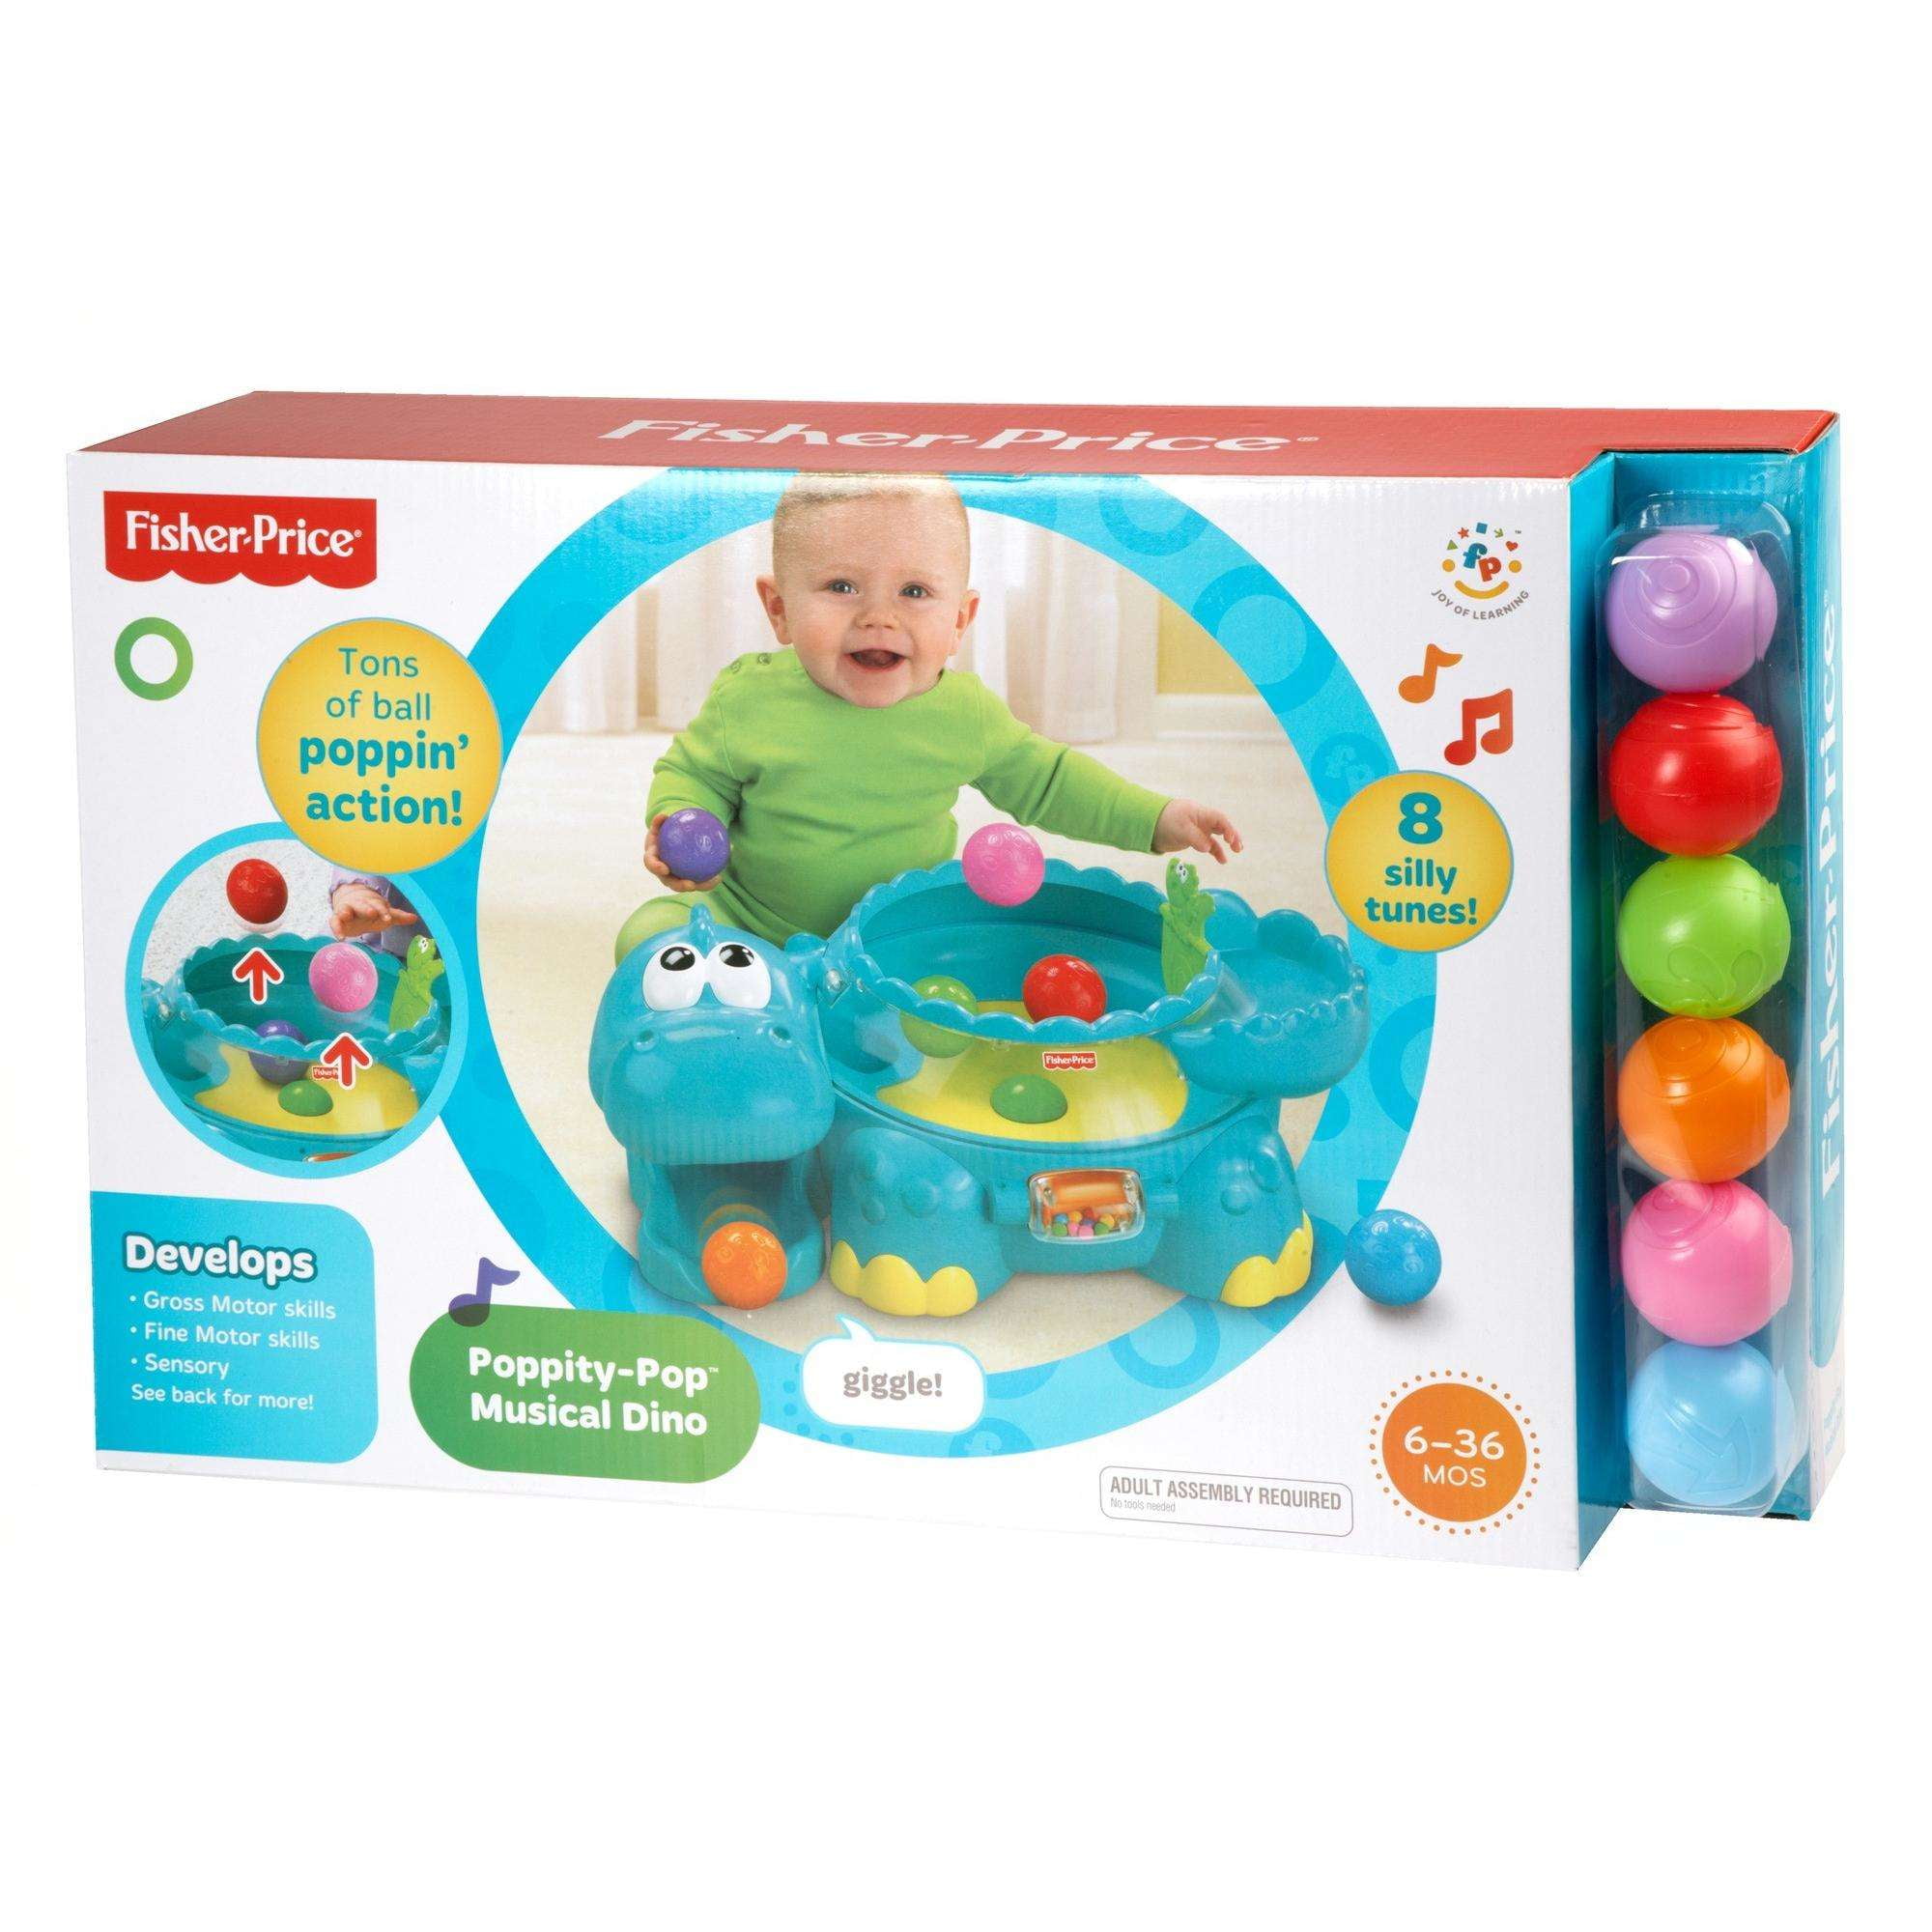 fisher price baby ball toy